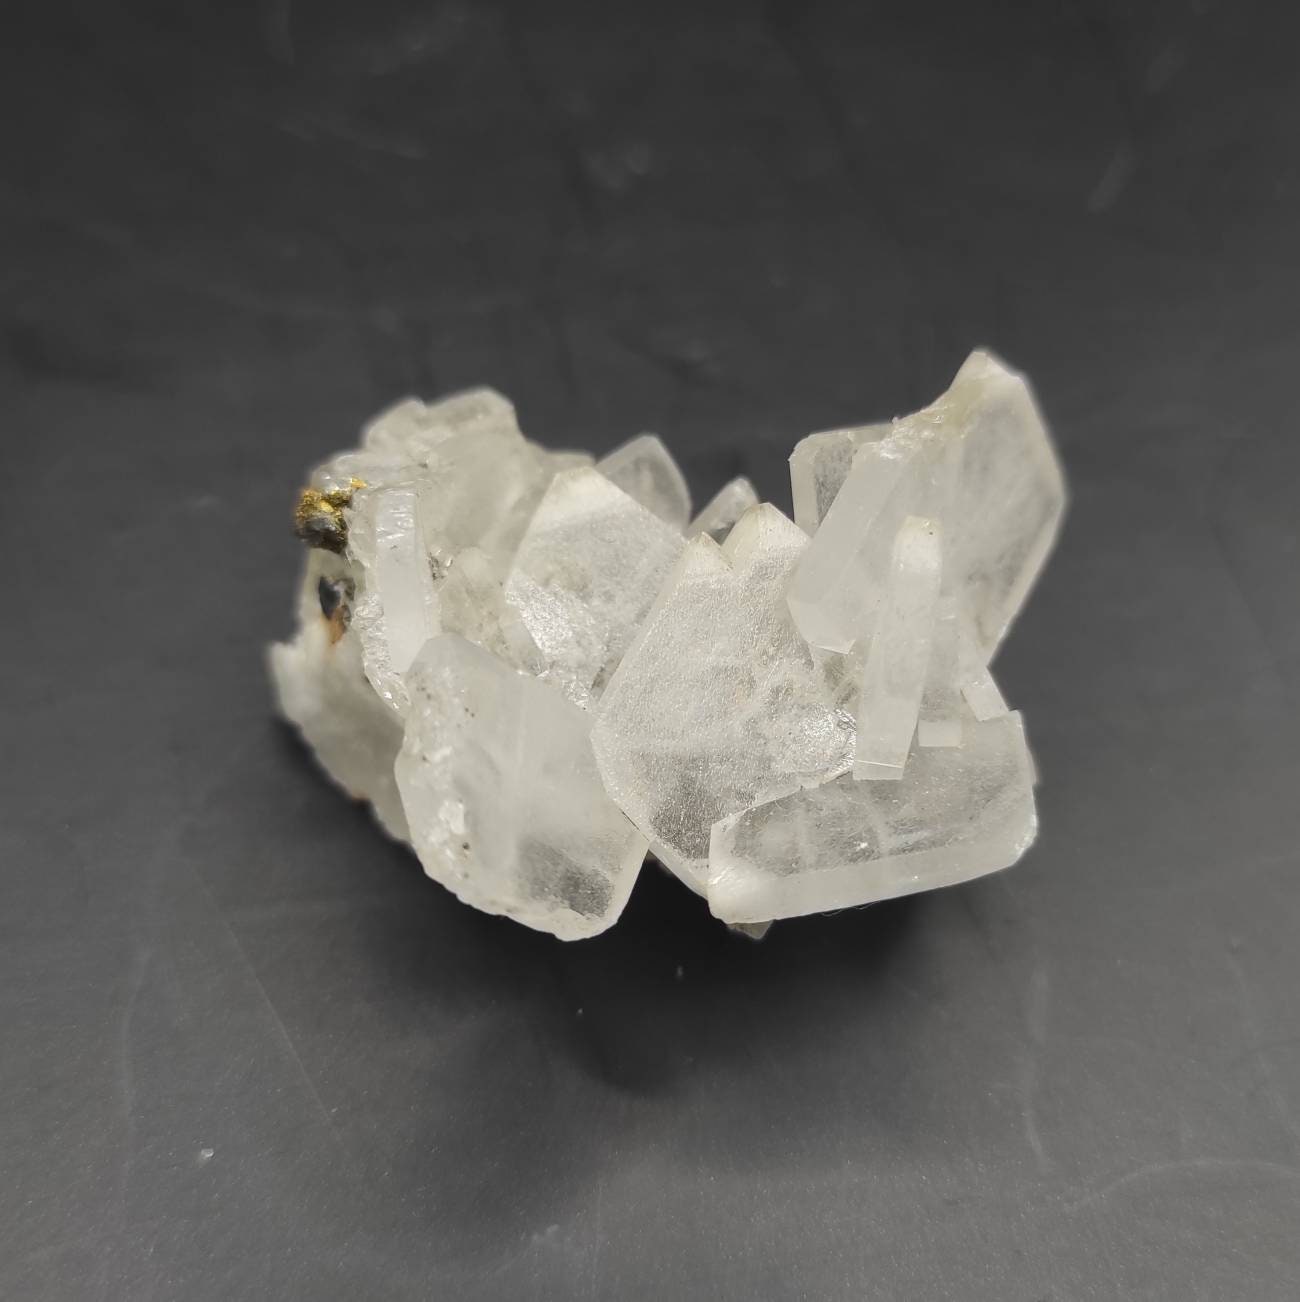 21g White Calcite Cluster - Natural Calcite Crystals - Calcite Specimen from Pakistan - Rough Calcite Crystal - Natural Calcite Formation